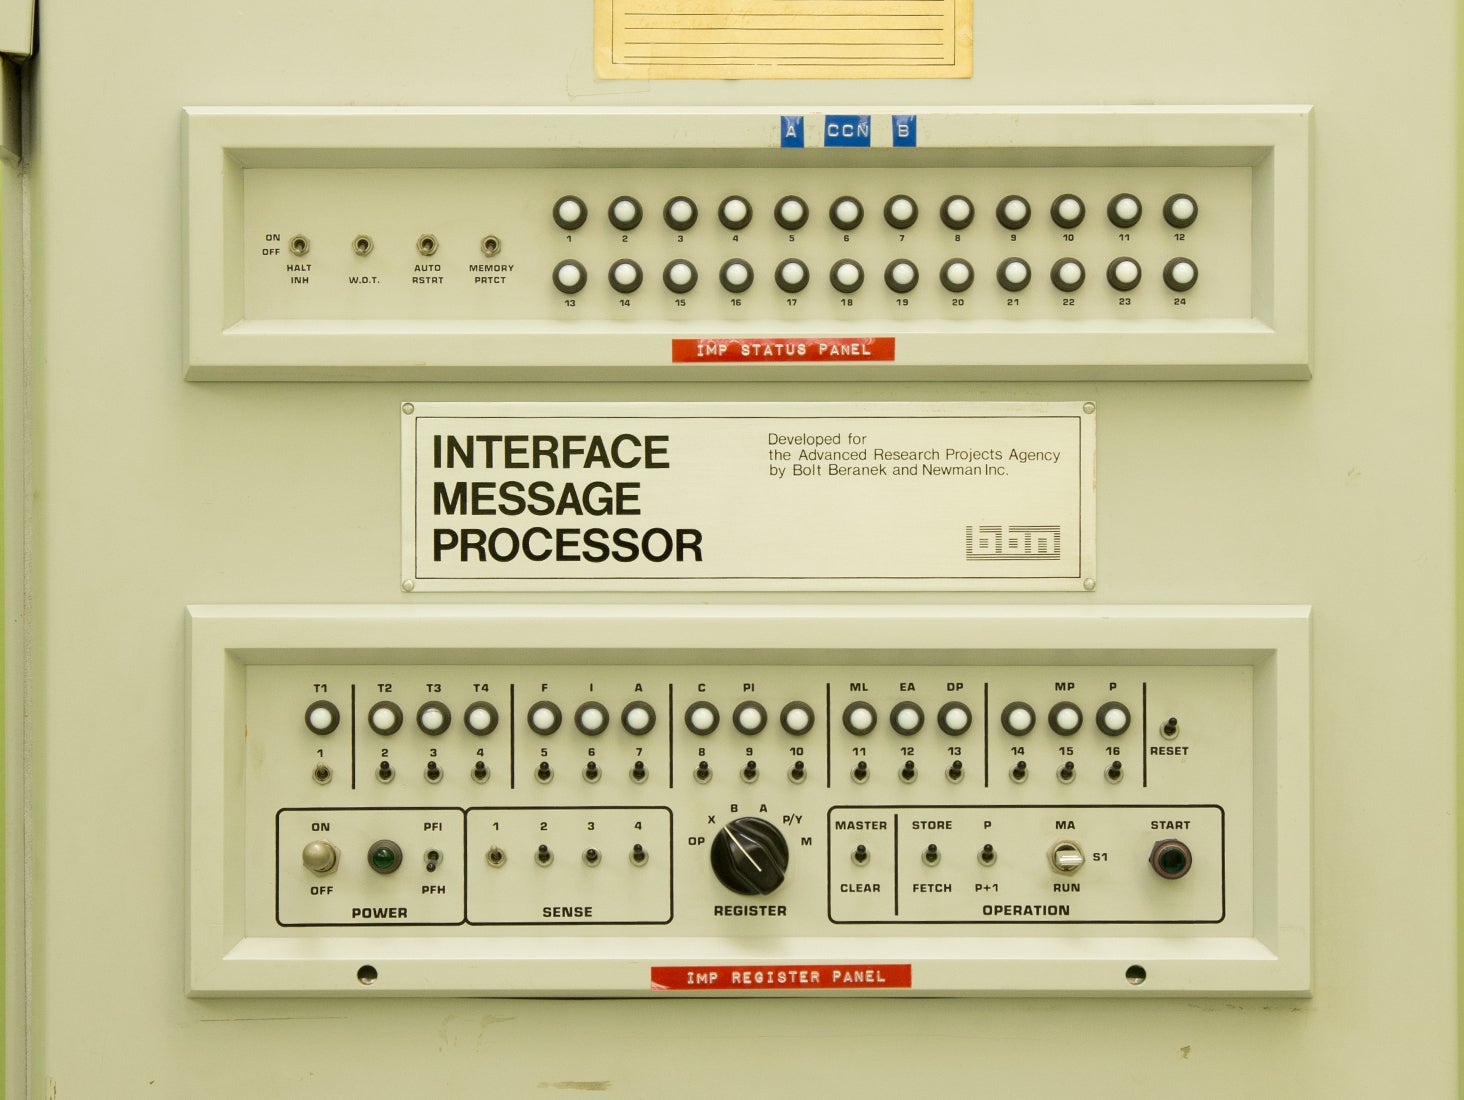 A Picture of an Interaface Message Processor